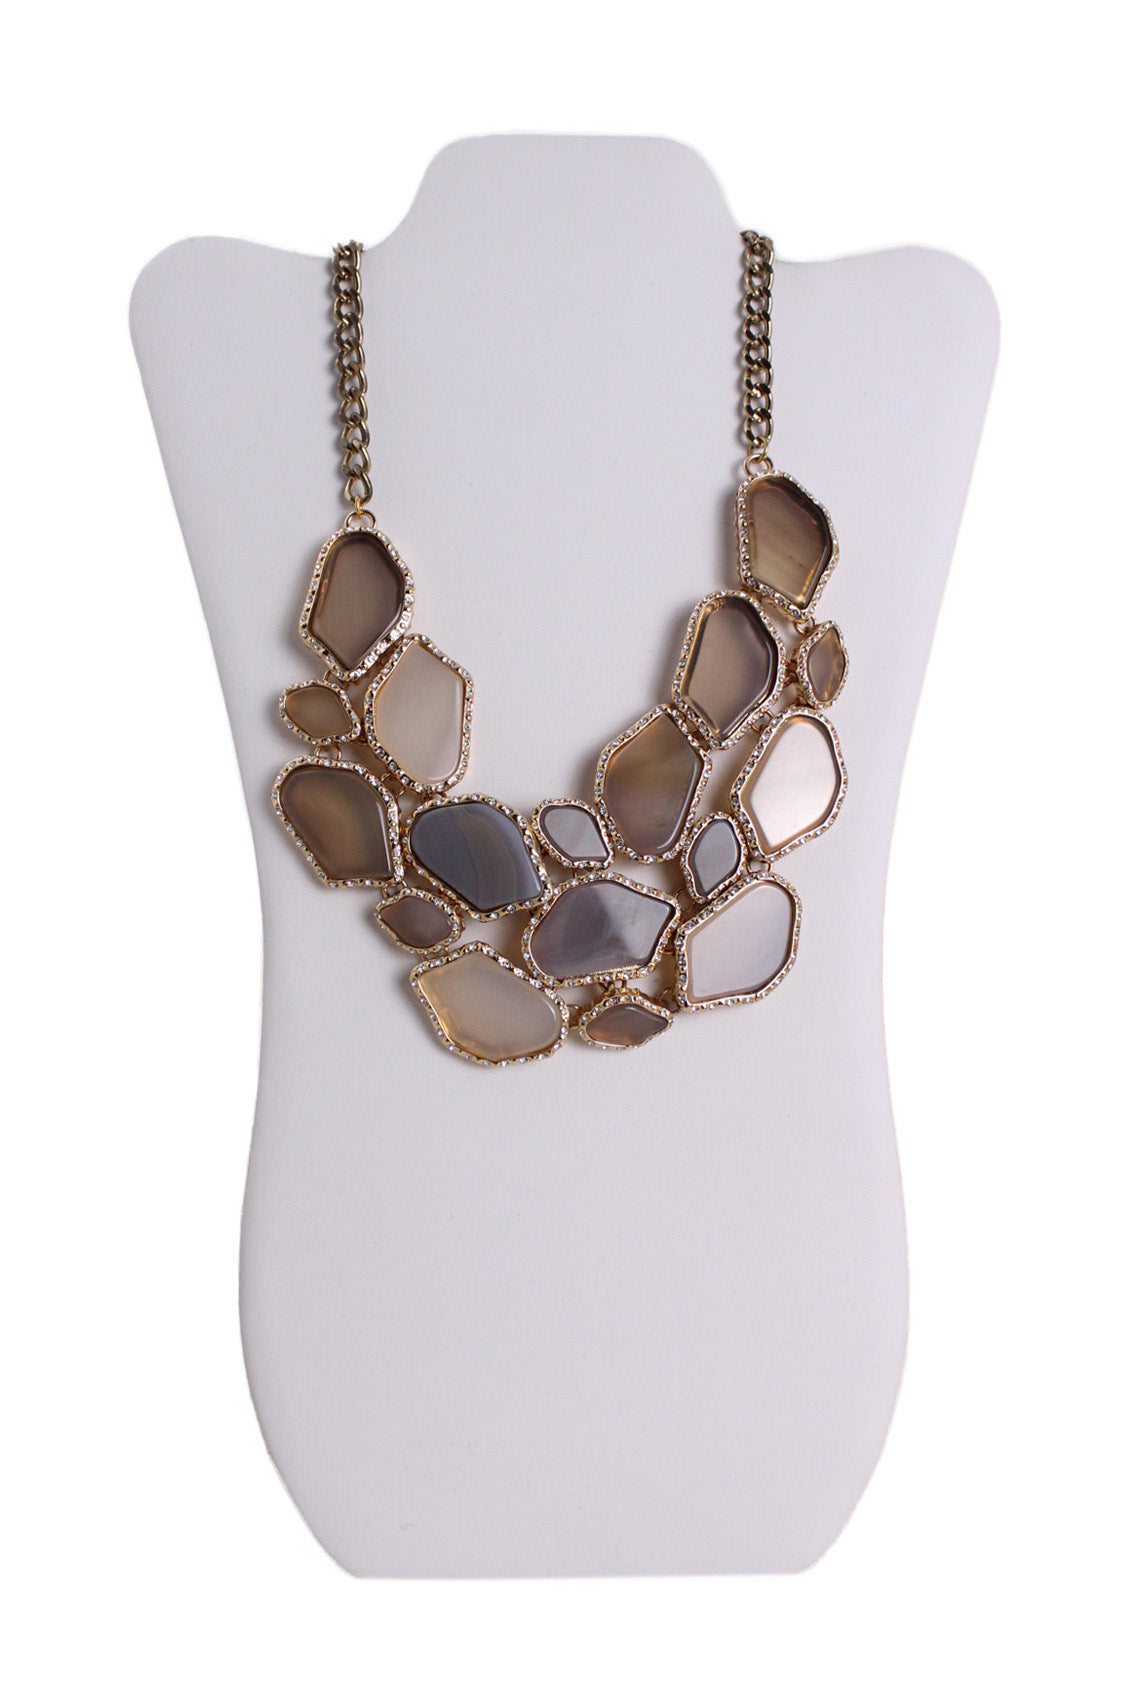 front of bcbg maxazria gold toned with stones necklace. features geometrical shapes laced in stones, and rhinestones all over.